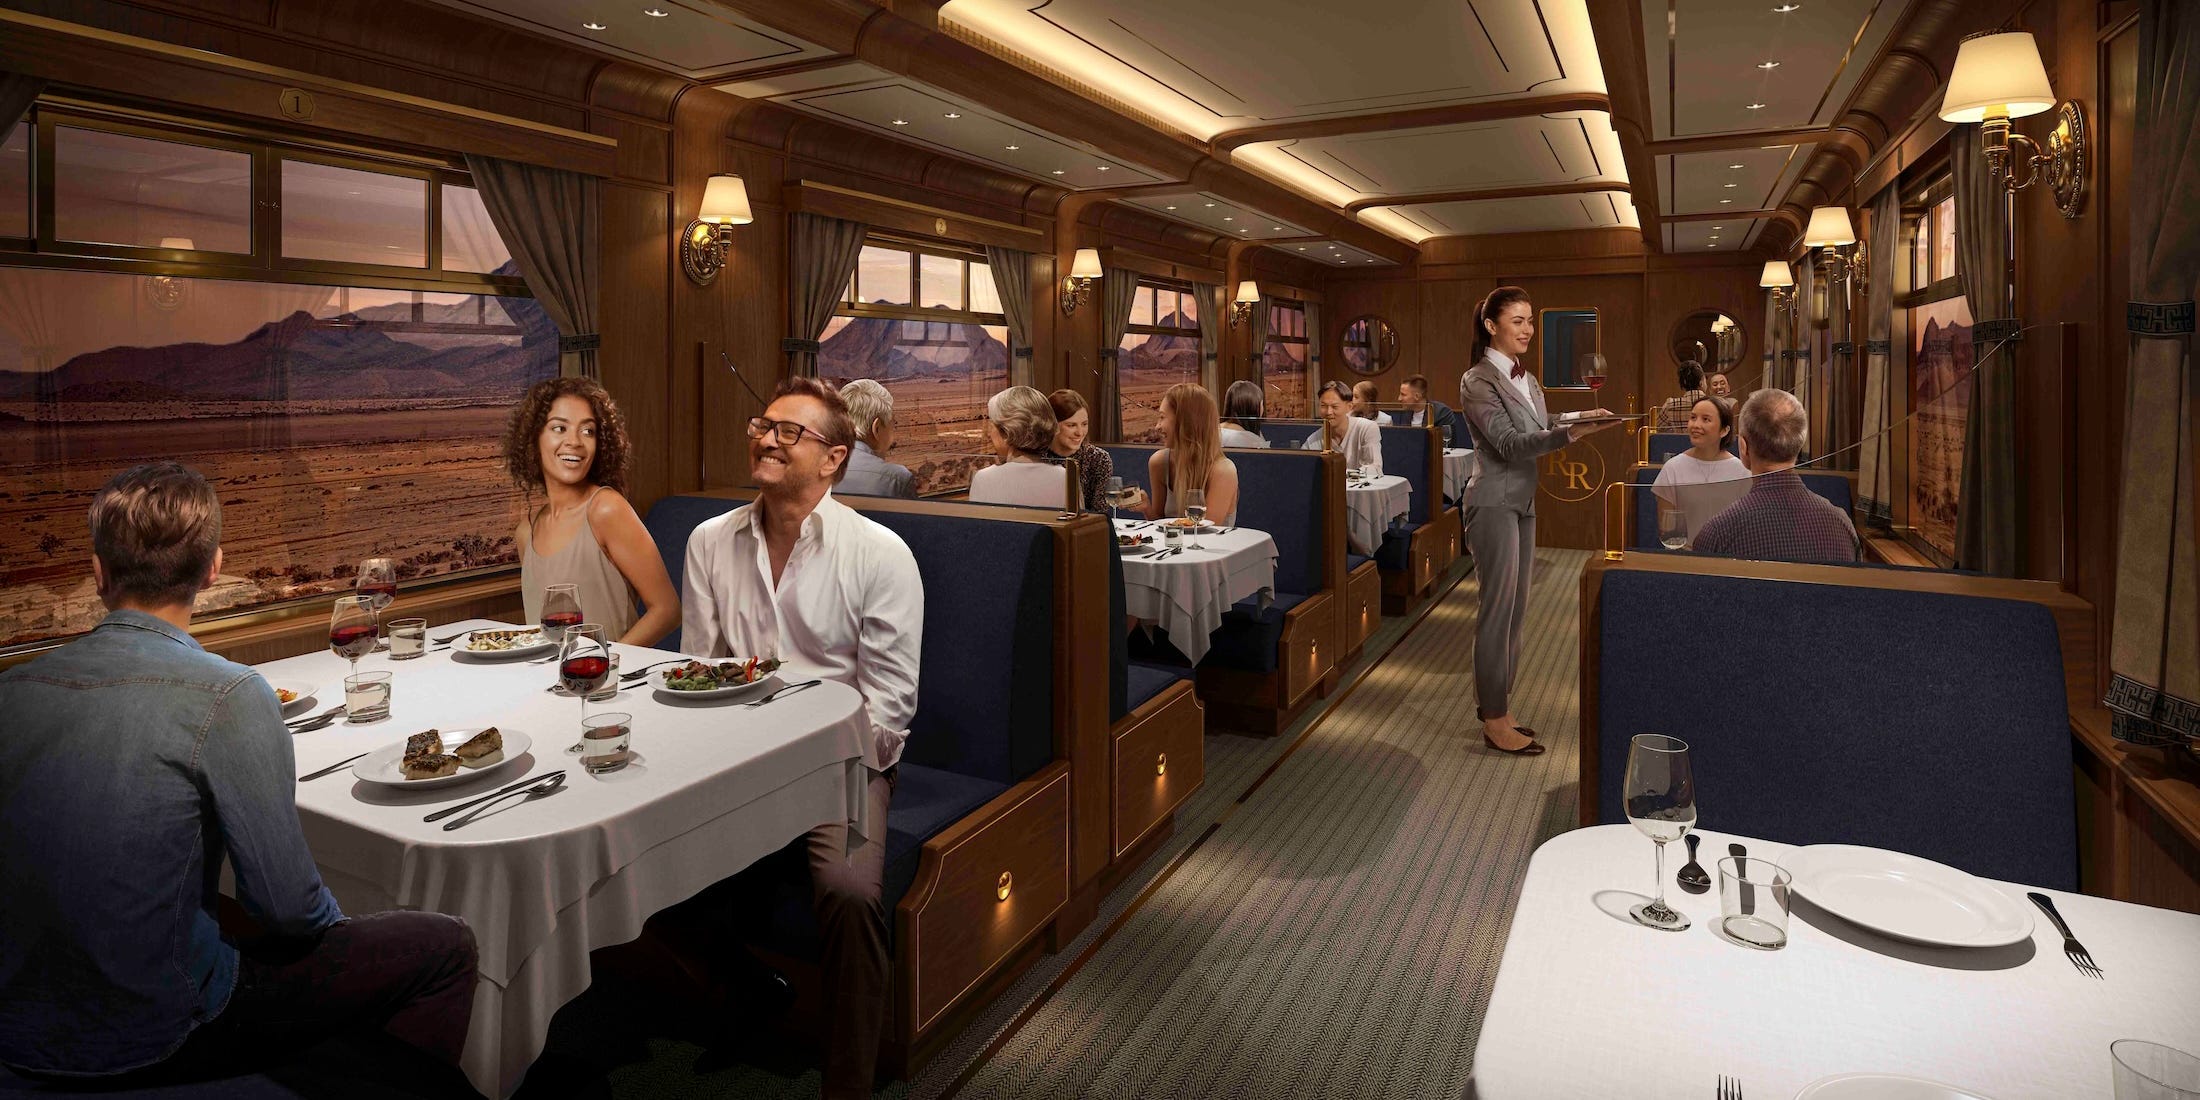 <p>The upcharged restaurant was designed to be an "eater-tainment" venue, Jay Schneider, the chief product-innovation officer at Royal Caribbean Group, told reporters in January.</p><p>Think <a href="https://www.businessinsider.com/4-luxury-hospitality-companies-ultra-luxury-cruise-lines-photos-2023-2">Orient Express</a>, but with a Wild West time-traveling flair, five courses of American fare, and digital screens disguised as windows.</p>